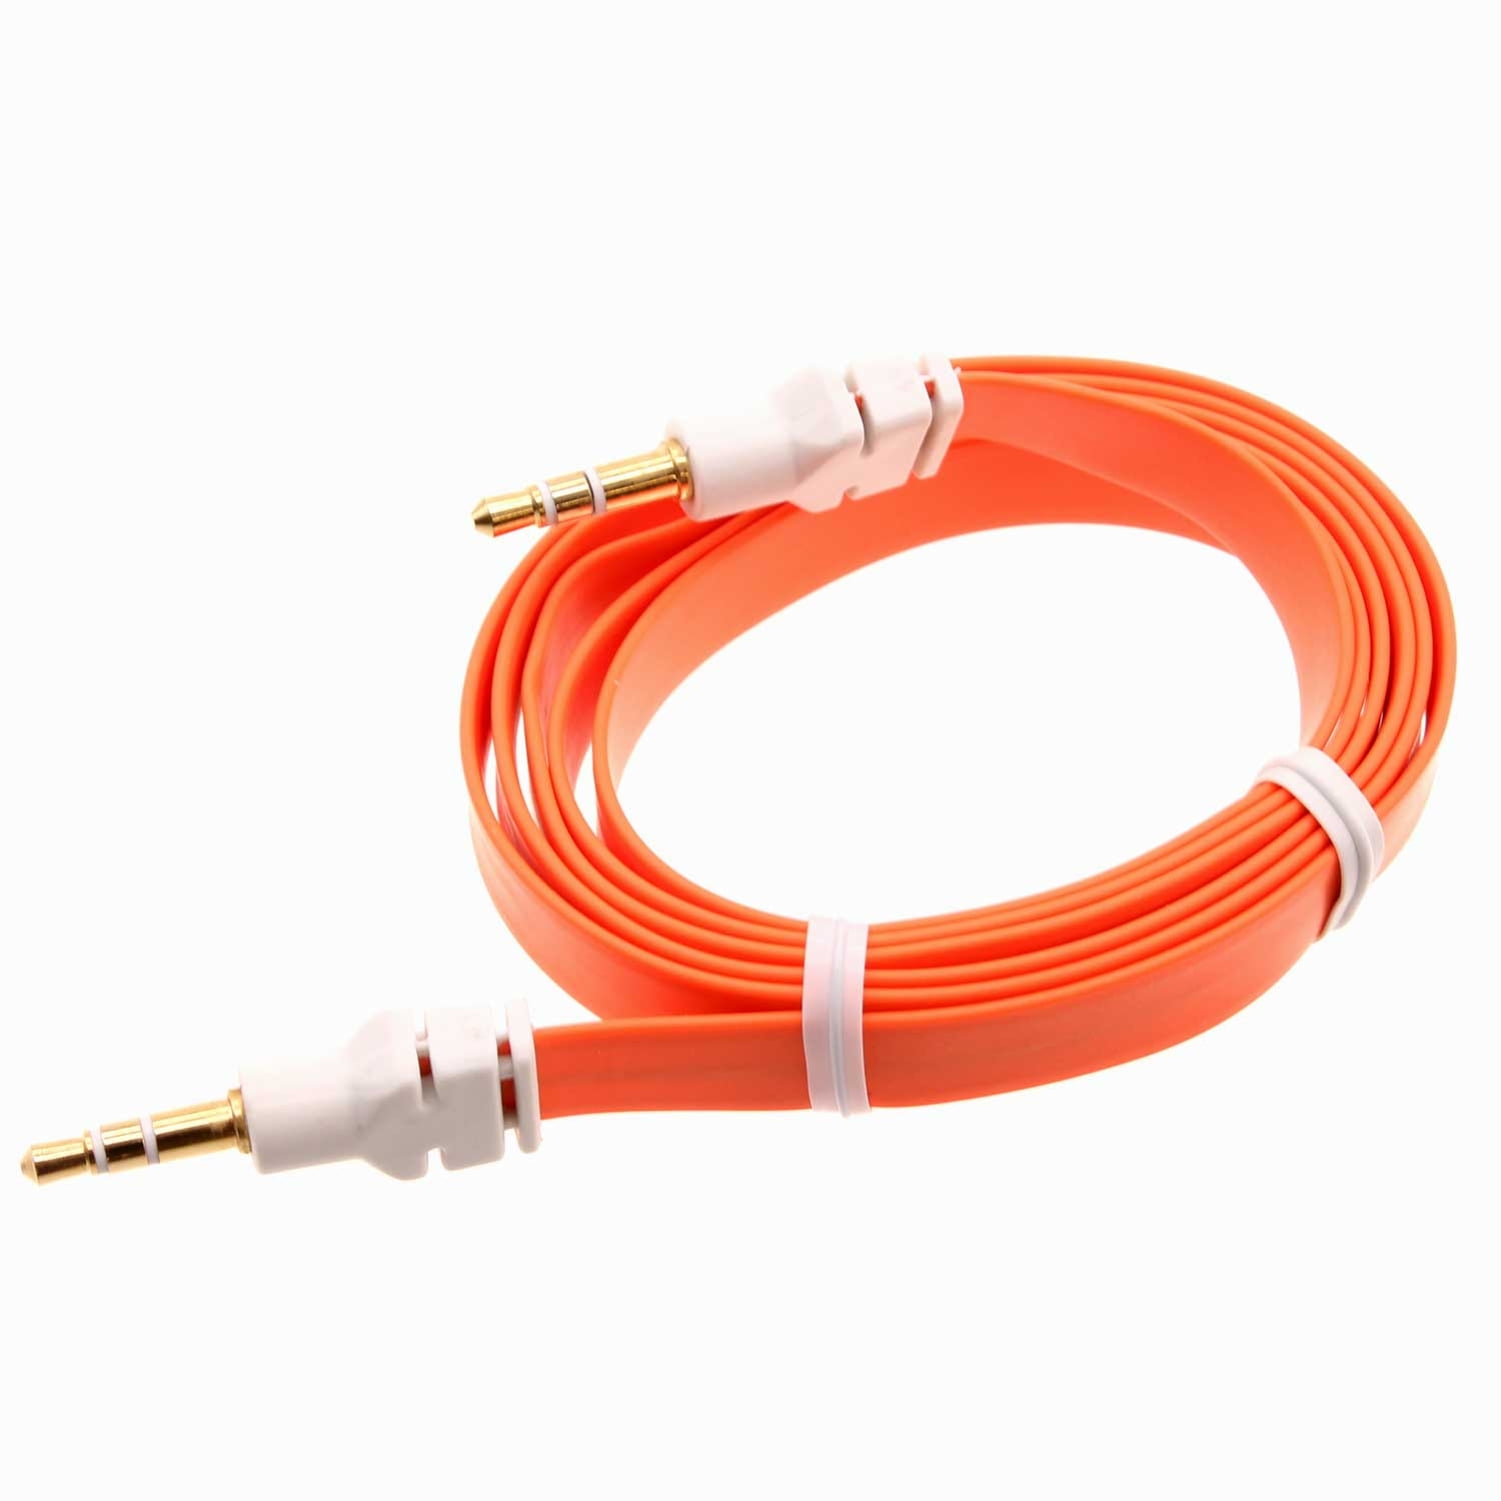 2PCS 3FT 3.5MM AUX AUDIO STEREO CABLE RED SAMSUNG GALAXY S2 S3 NOTE NEXUS 4G 